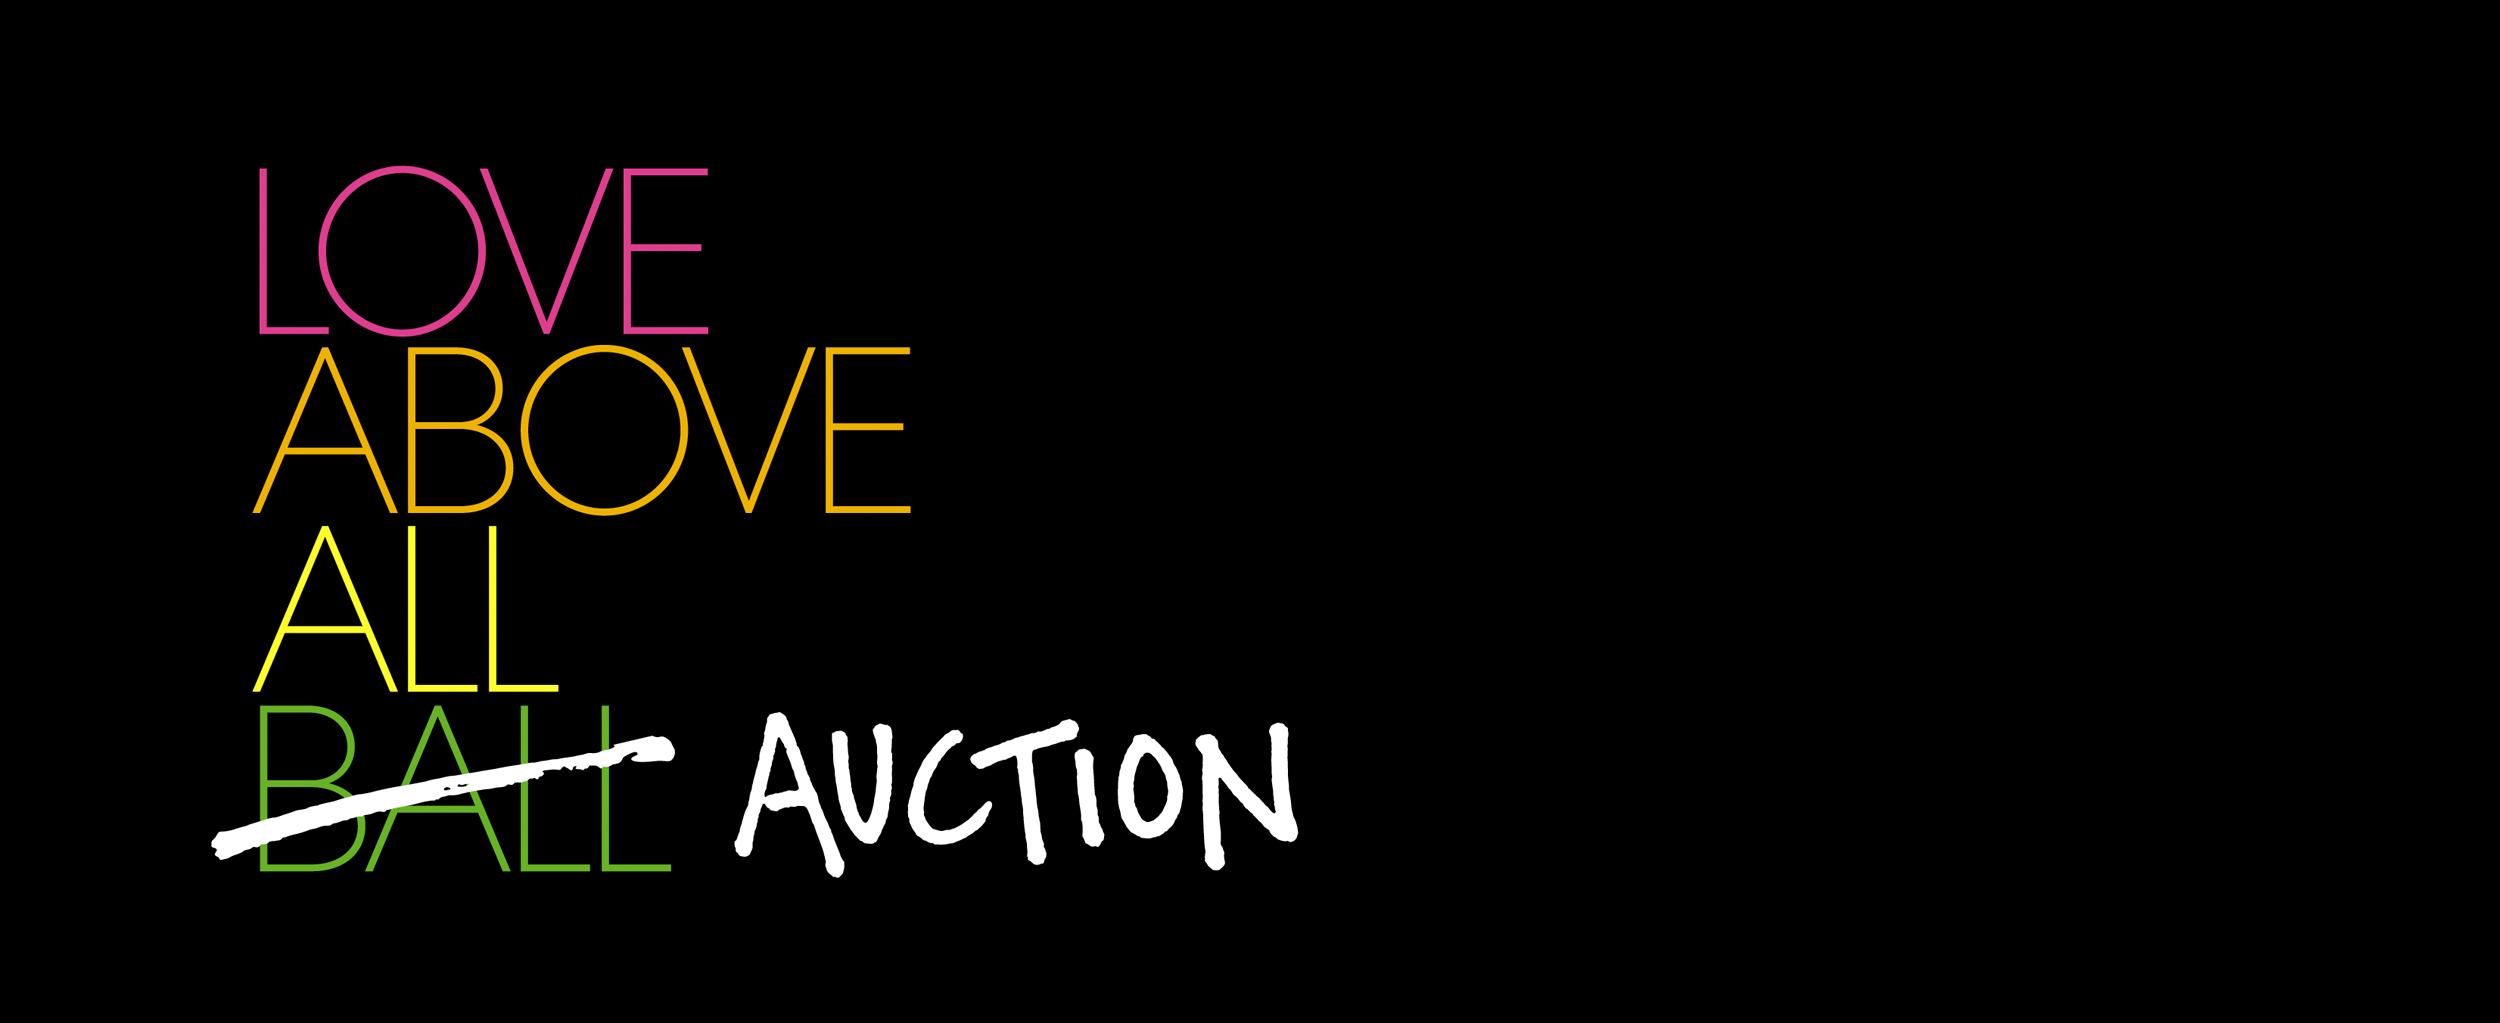 Love Above All Auction: Master & Dynamic Partners With Nir Hod To Benefit The Ali Forney Center